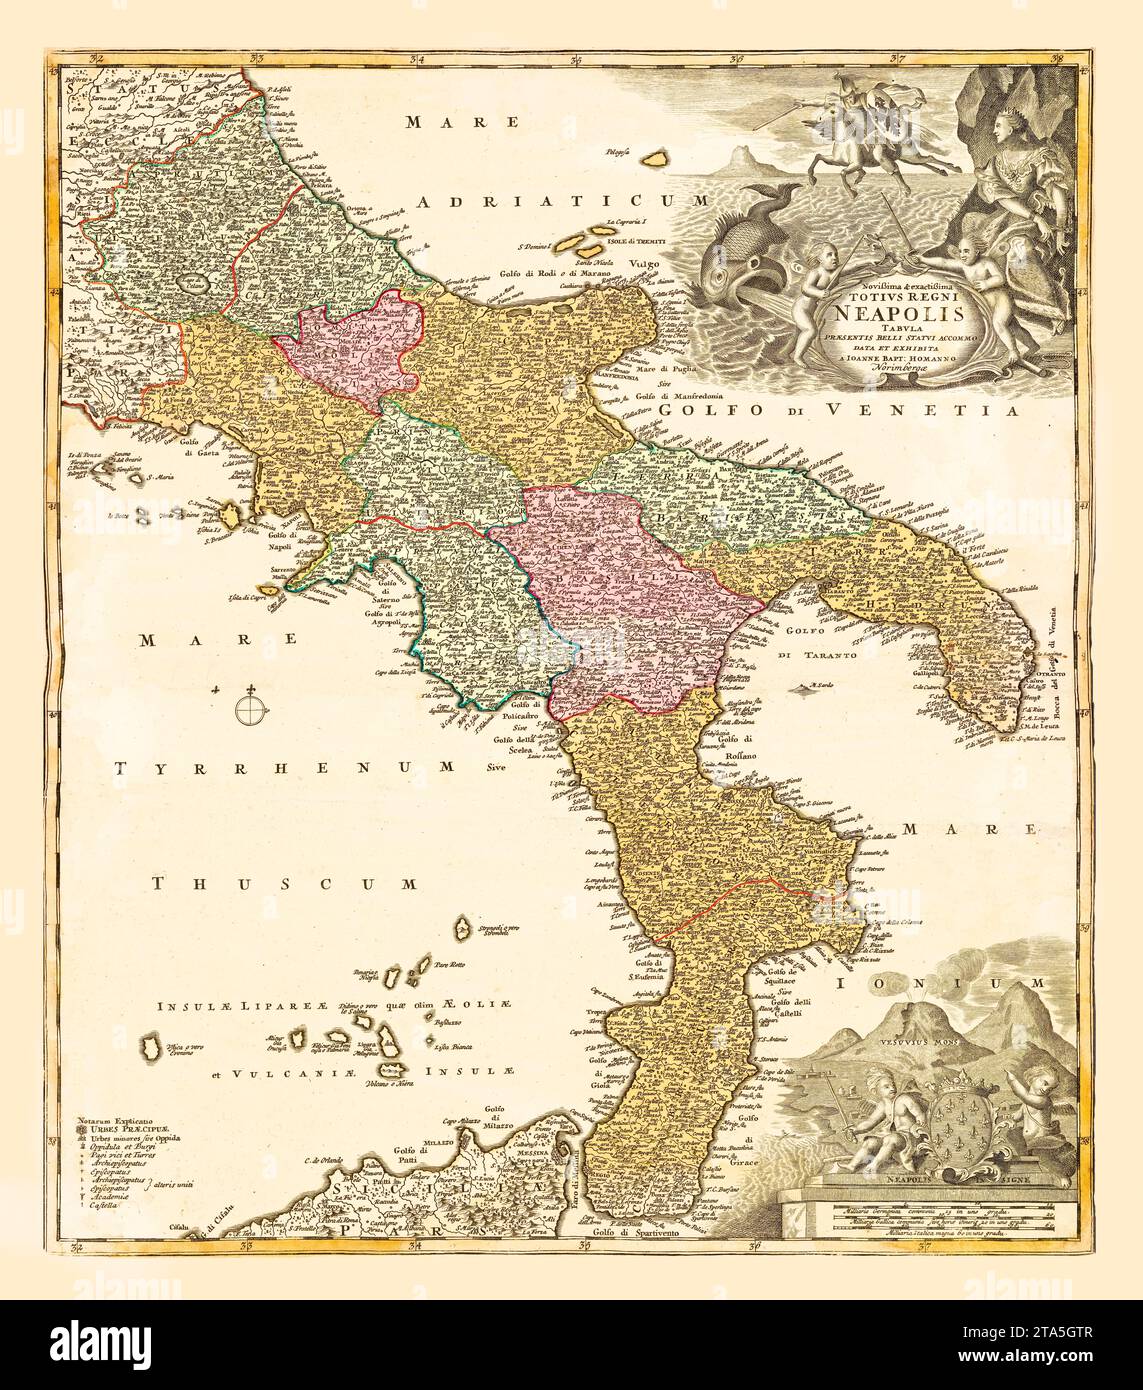 Old map of the Kingdom of Naples, Italy. By Homann, publ. in Nuremberg, ca. 1760 Stock Photo